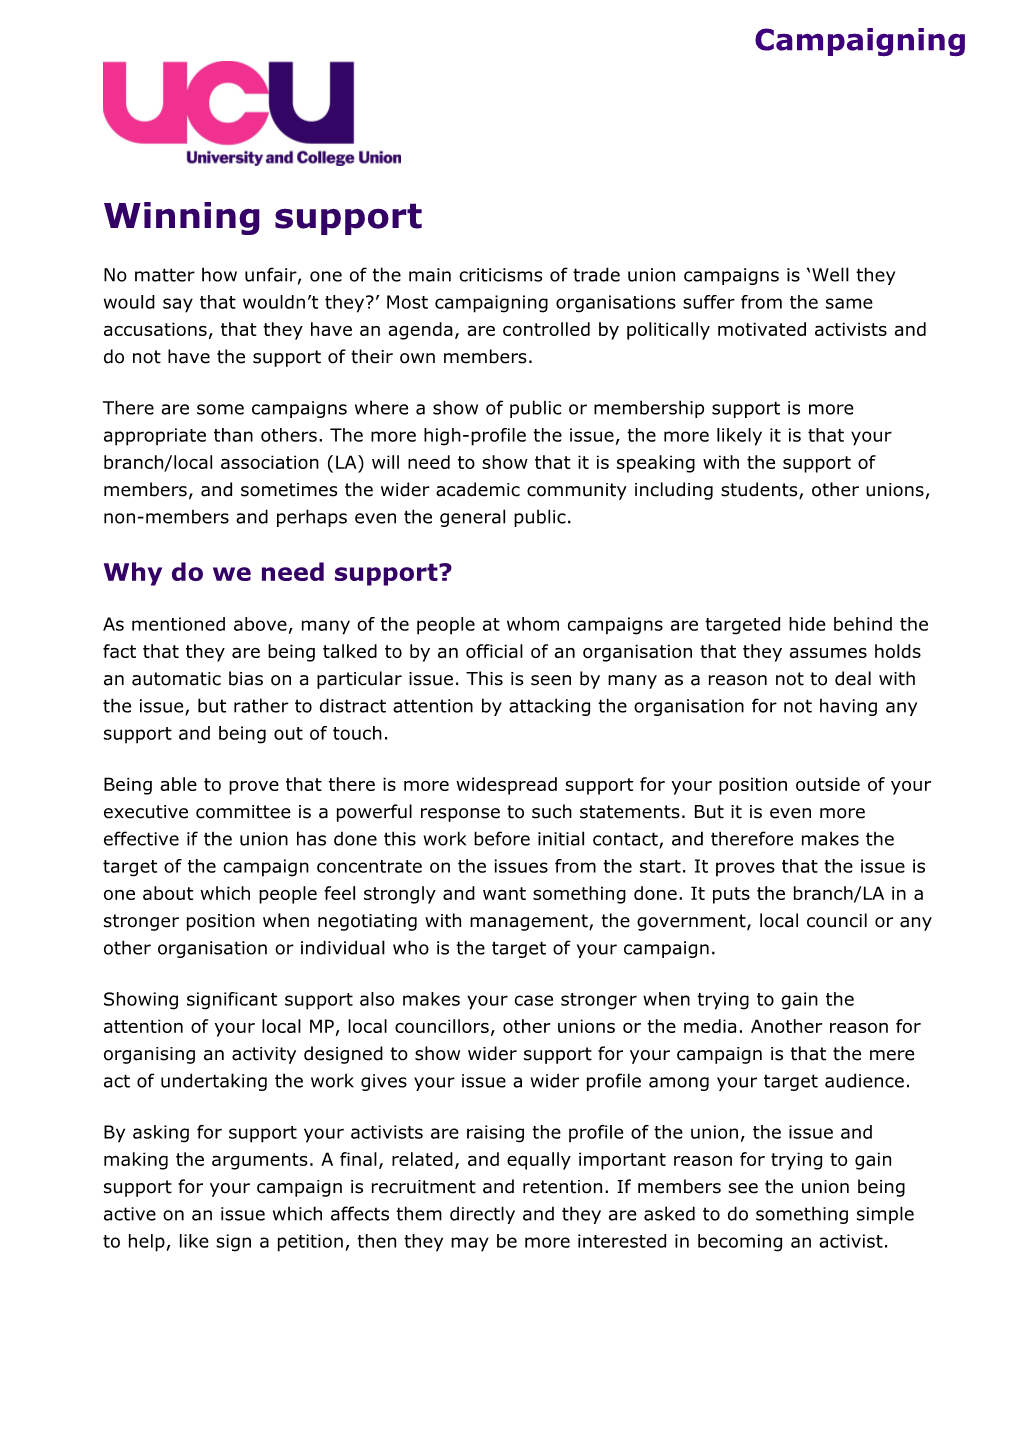 Why Do We Need Support?